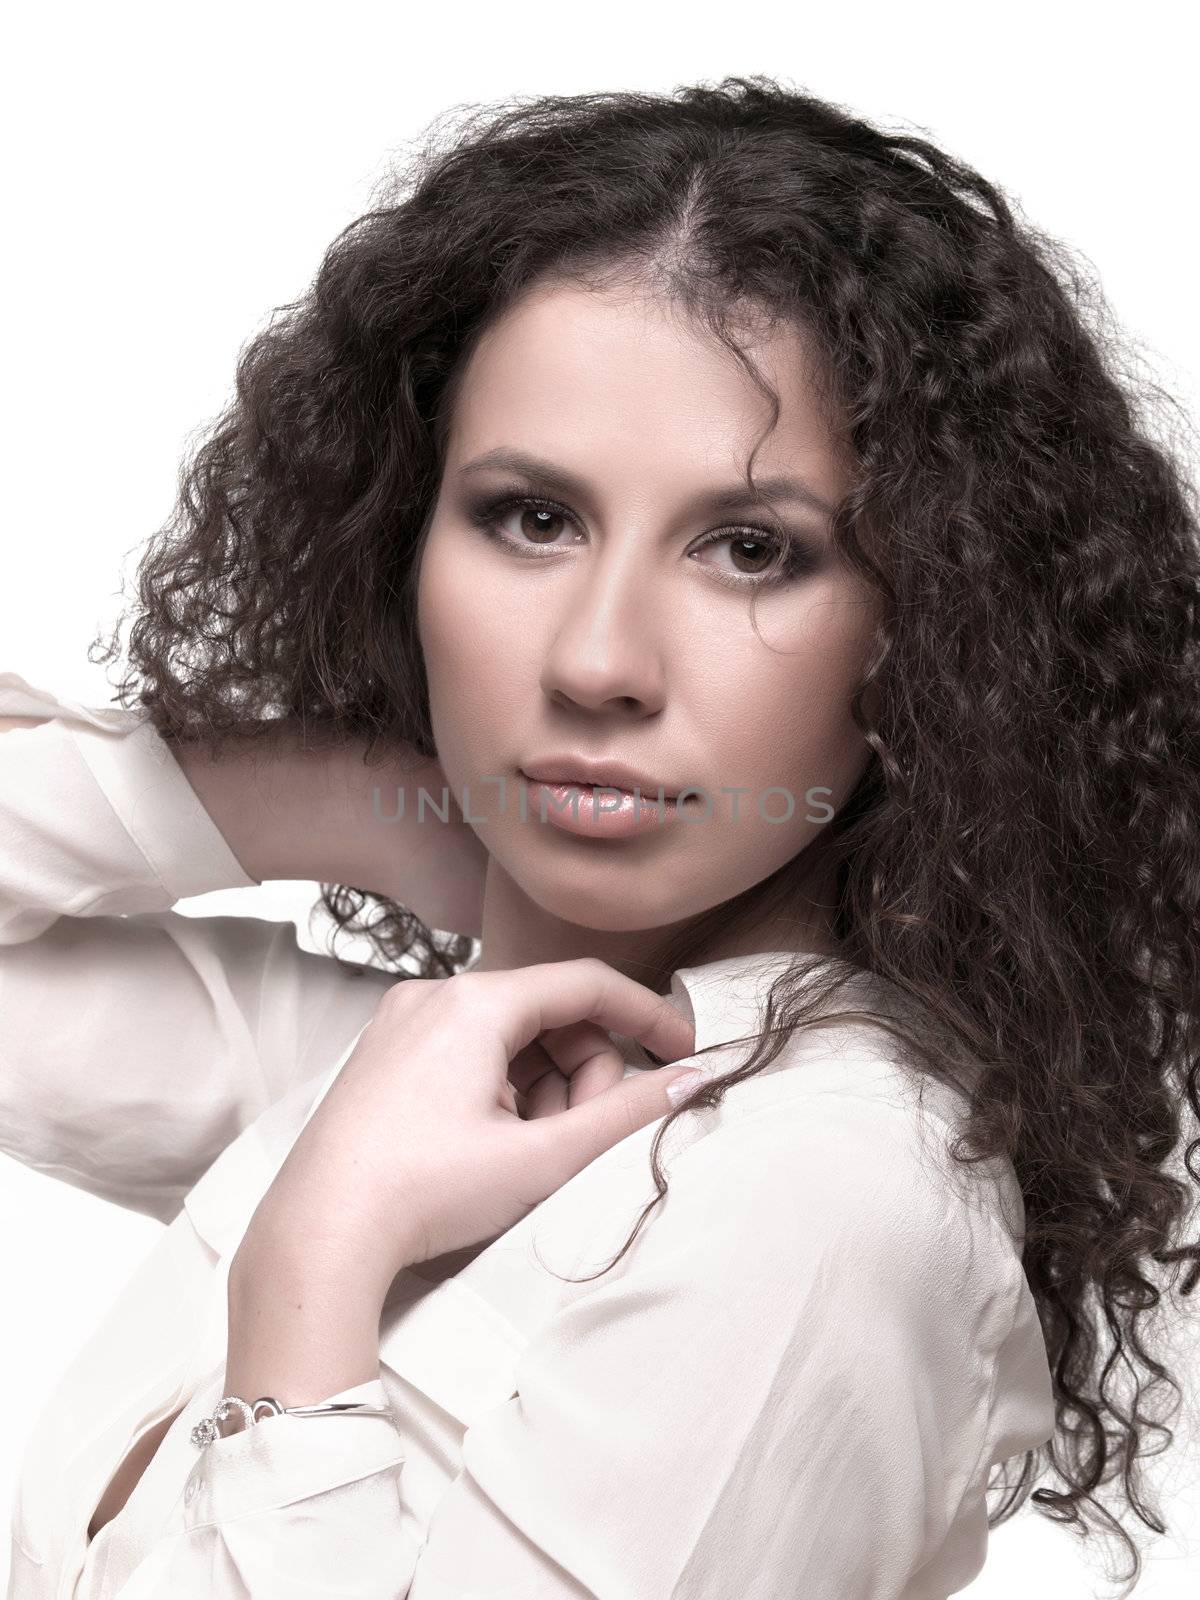 Beauty portrait of a young woman with long curly hair